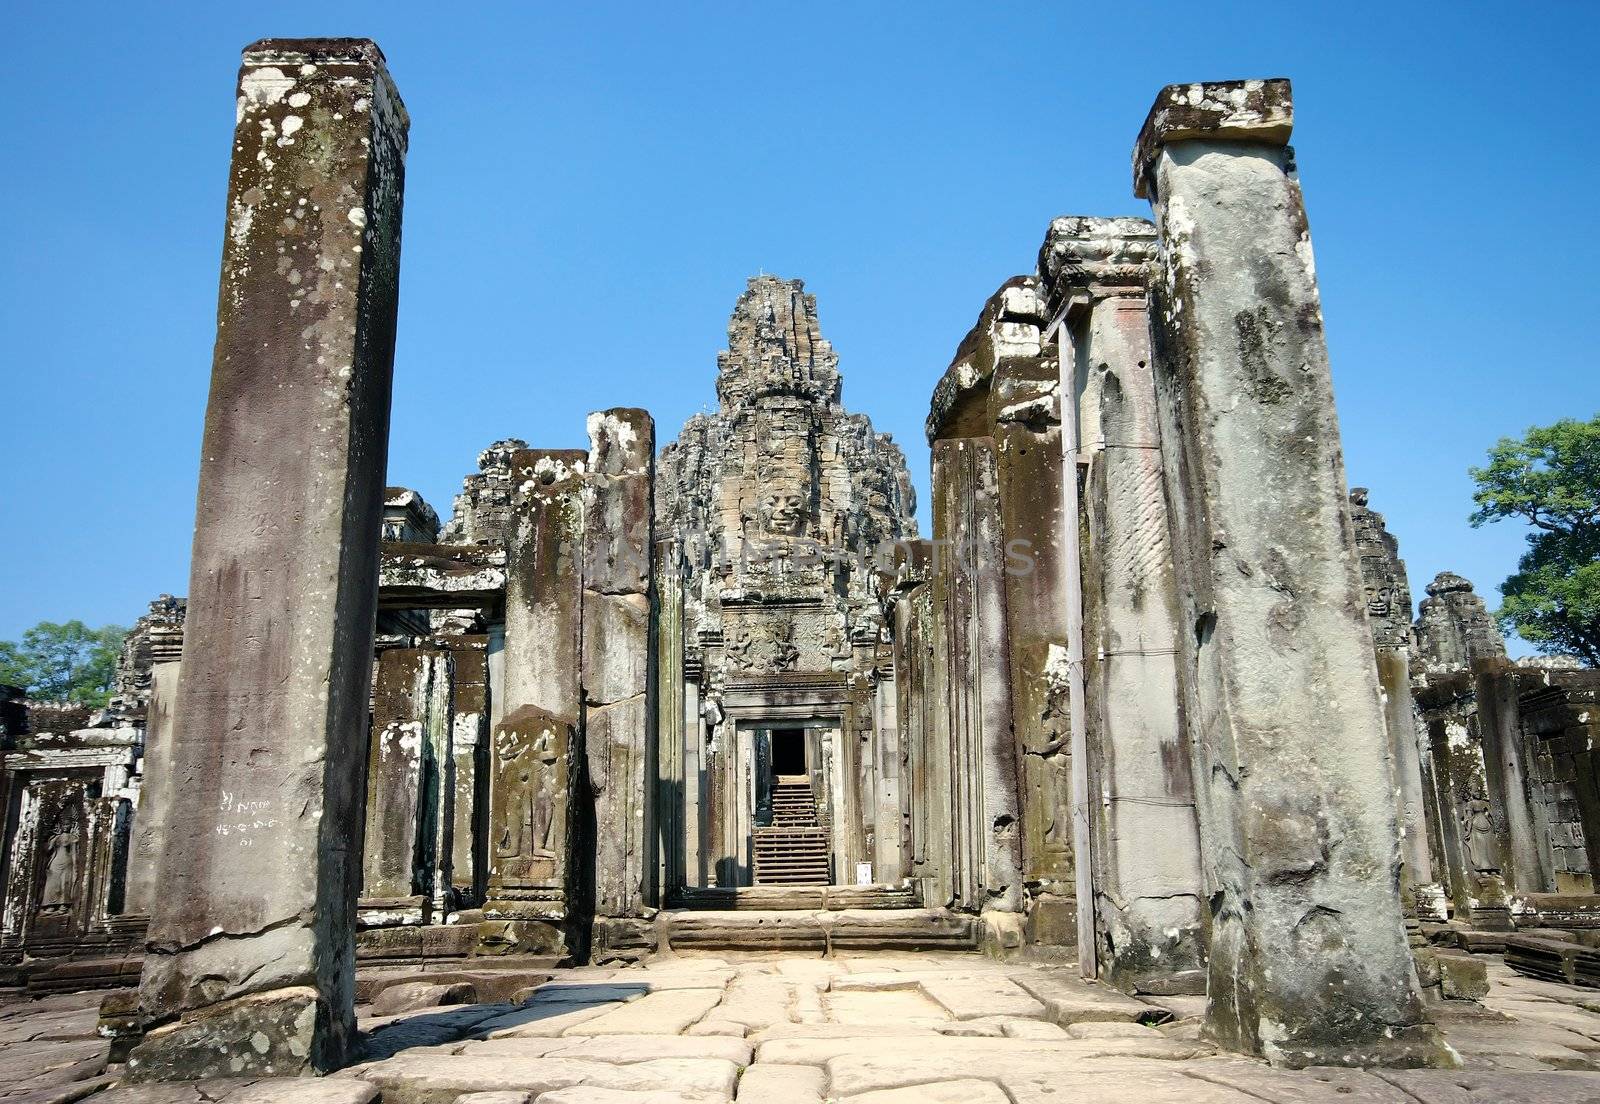 Entrance to Bayon, a temple built in the 12th century by king Jayavarman VII. Siem Reap, Cambodia.
